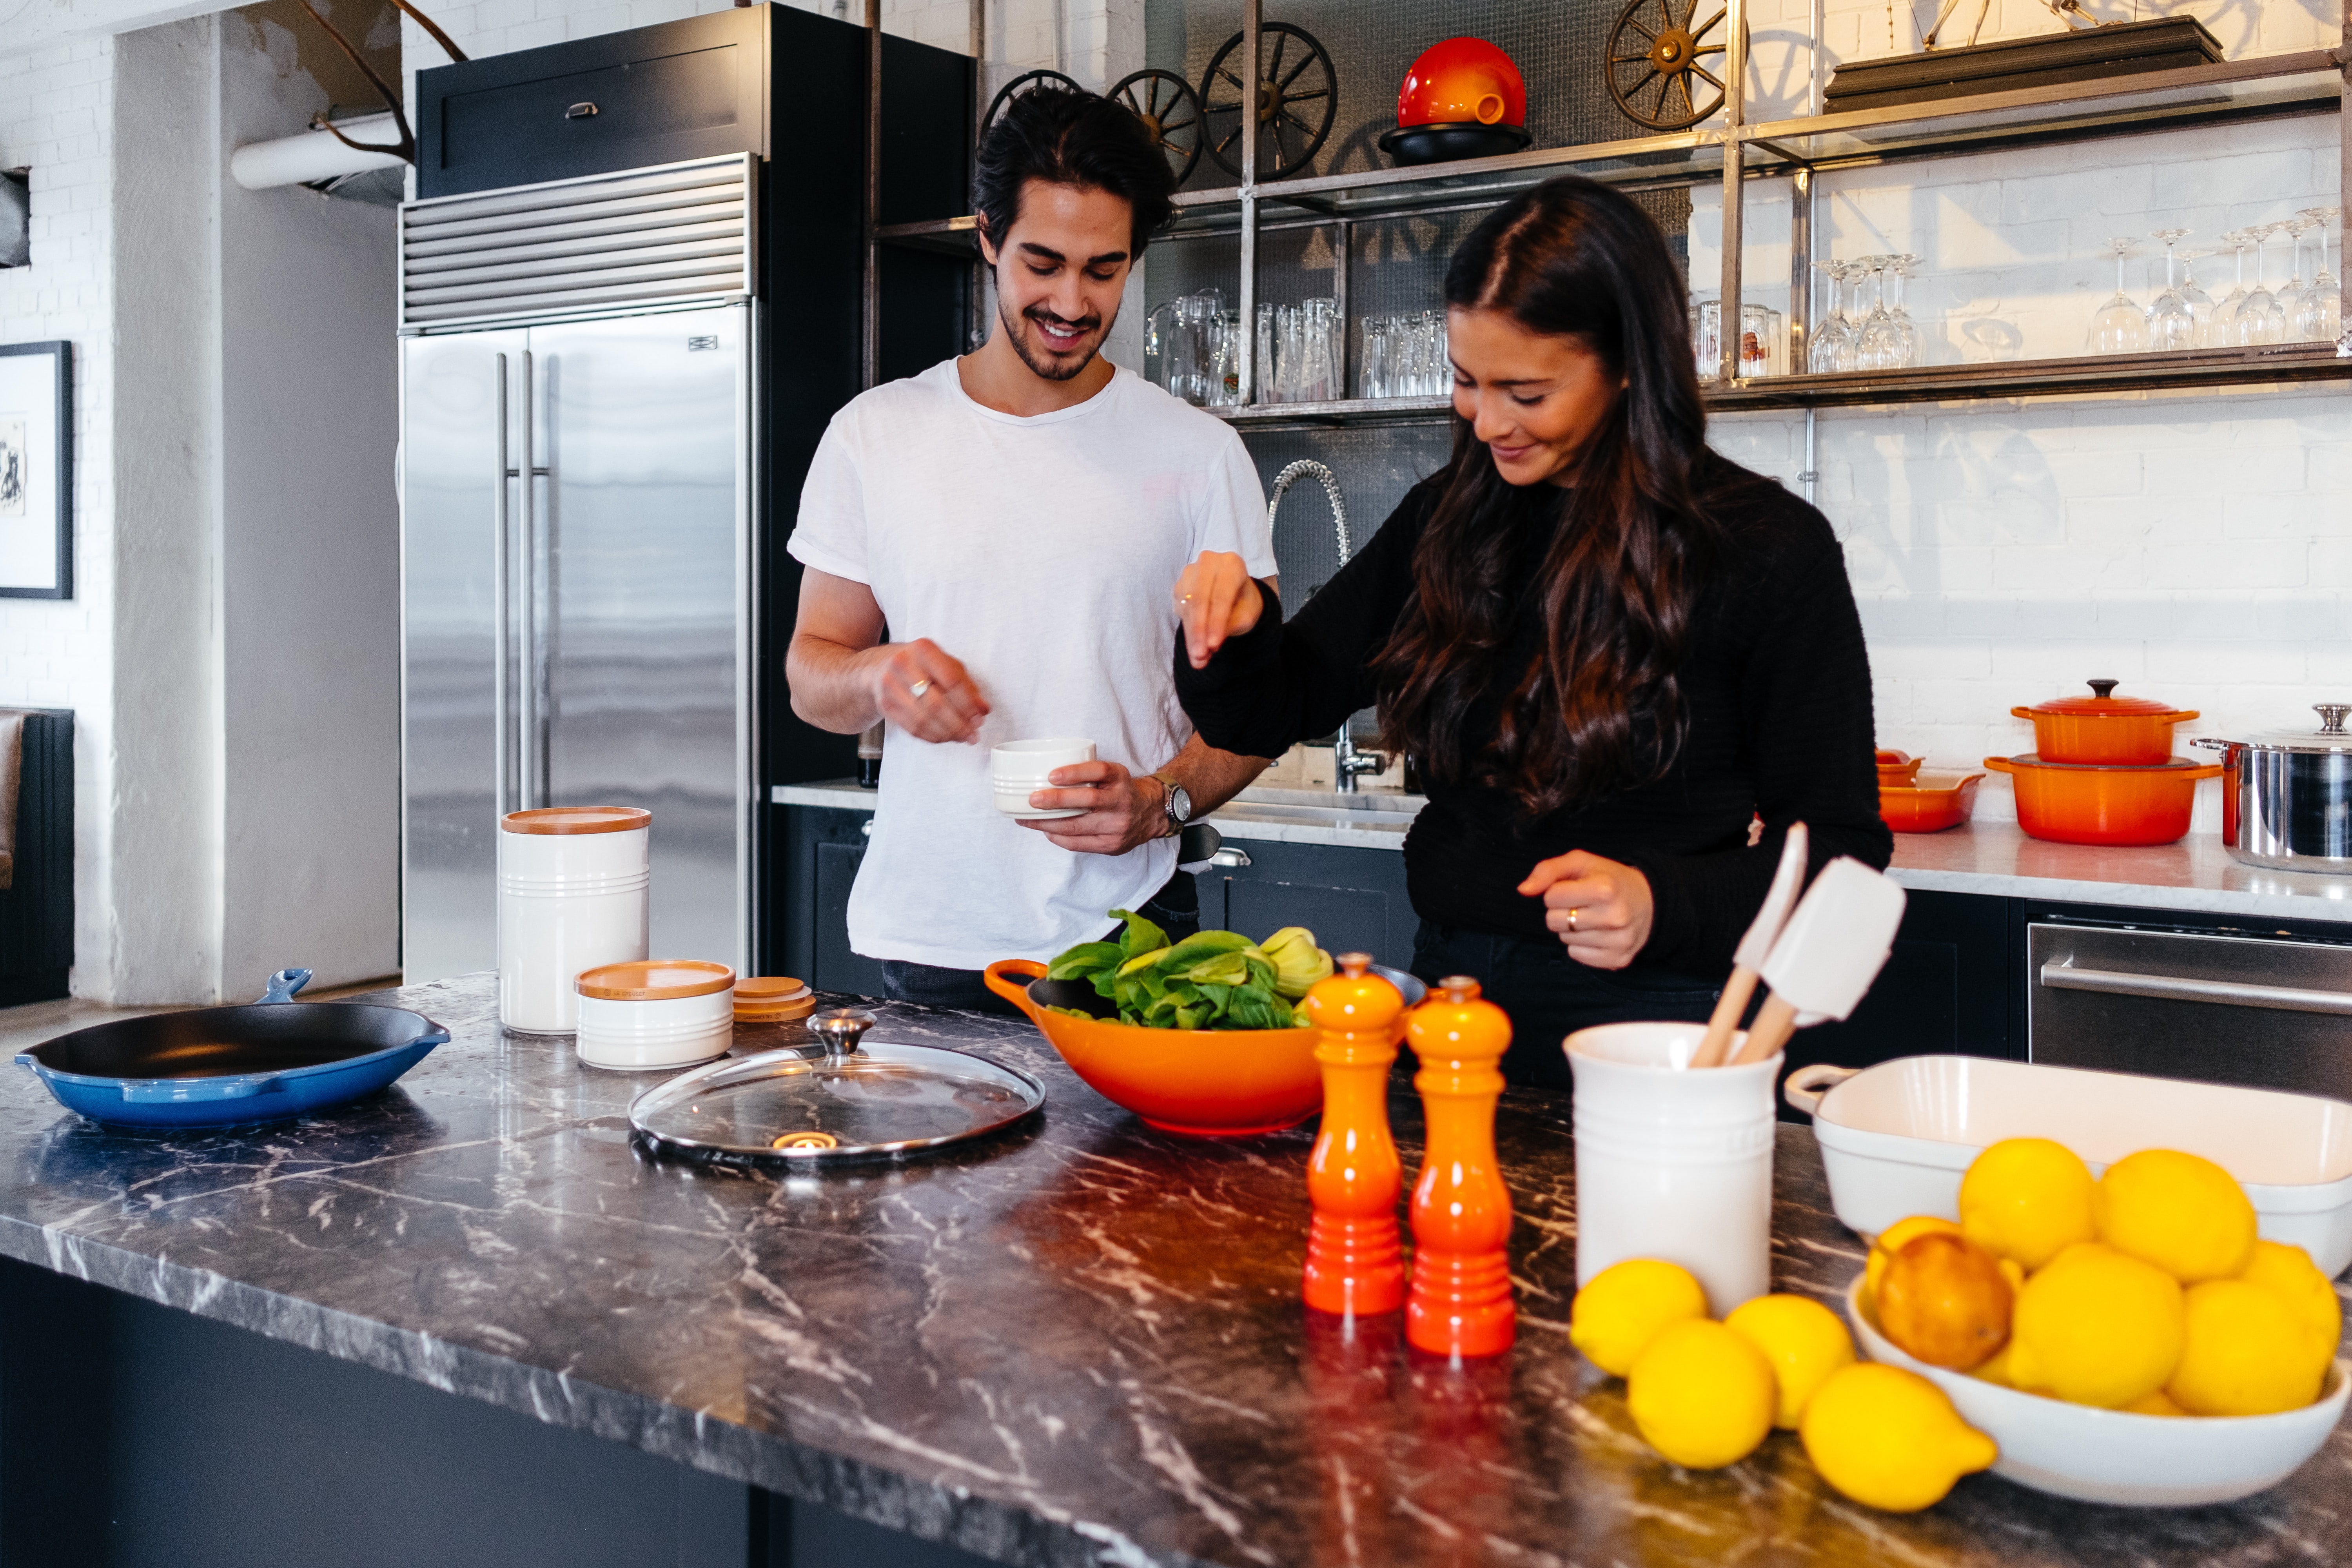 A man and woman cooking together in a kitchen as part of an Incentive Experience | BCD Meetings & Events